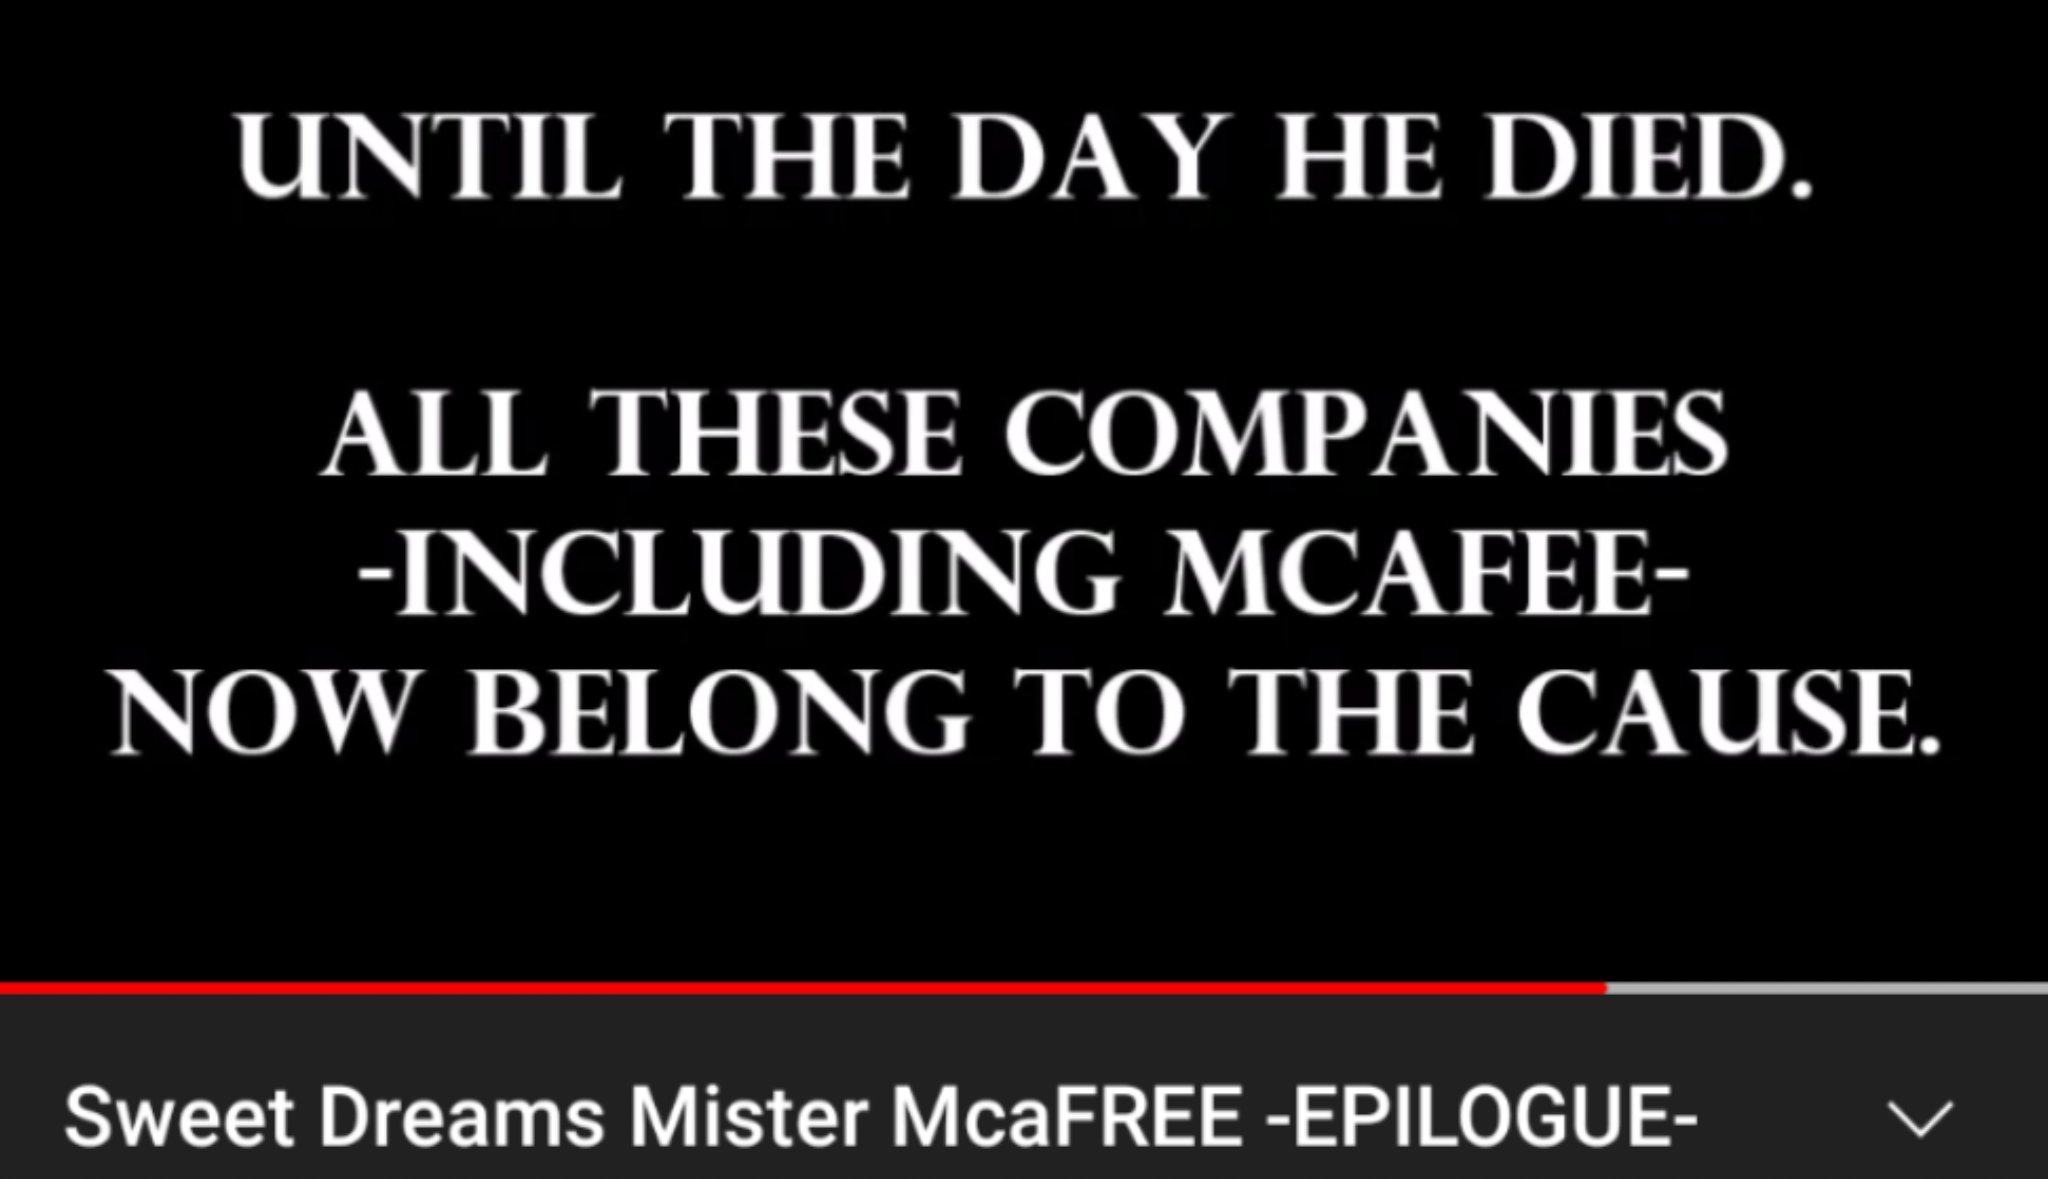 John McAfee Found Dead in Prison Cell after US Extradition Approved E5zYGf7WQAUZj0E?format=jpg&name=large